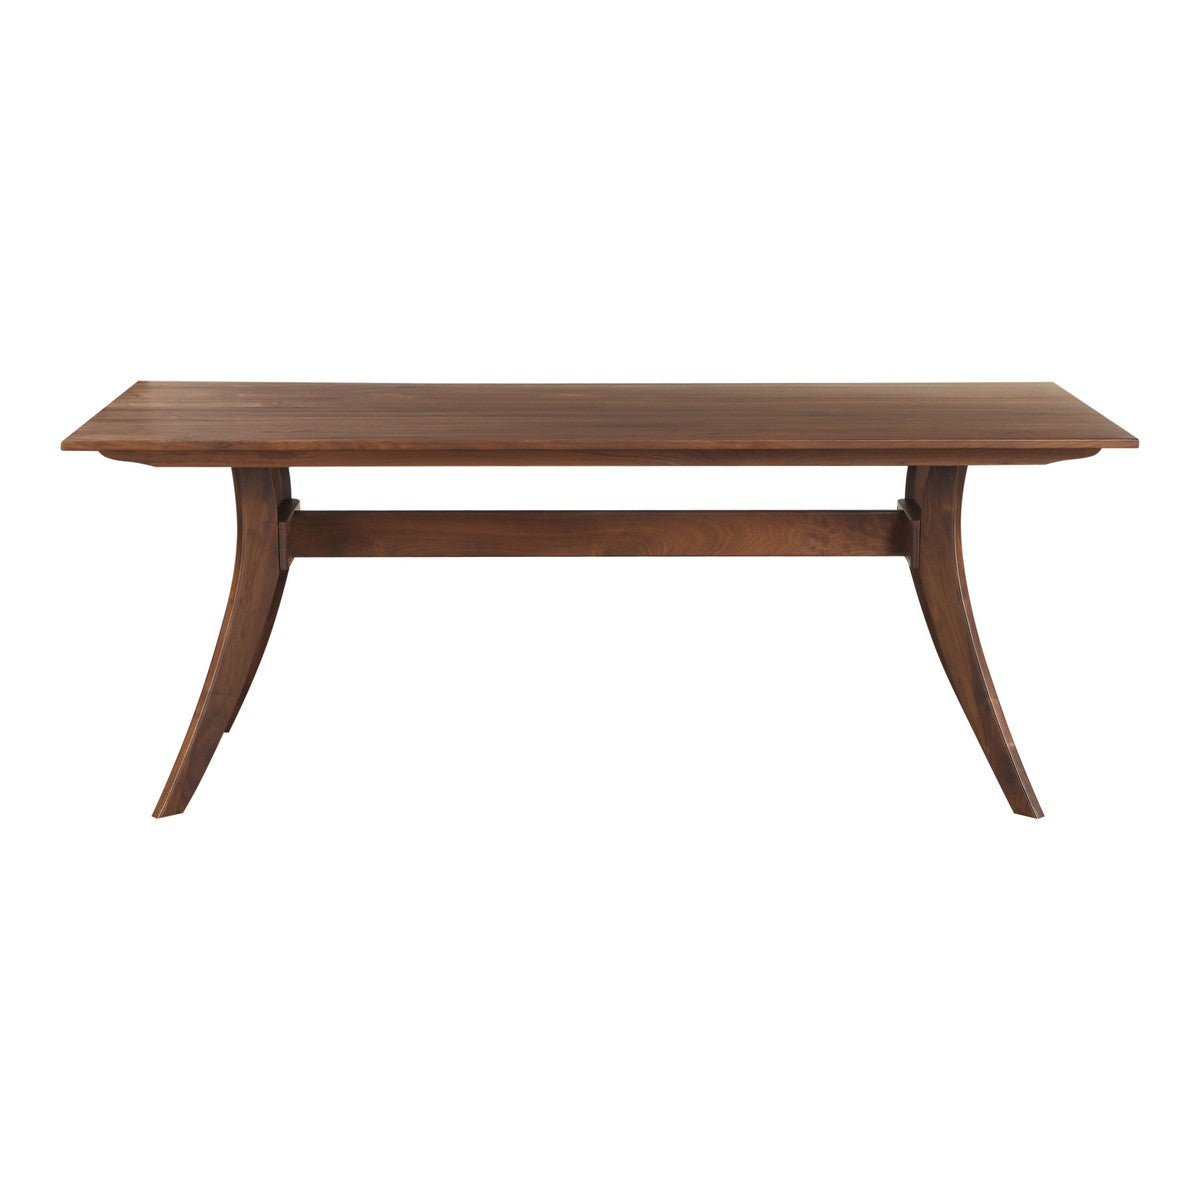 Moe's Home Collection Florence Rectangular Dining Table Small Walnut - BC-1001-03